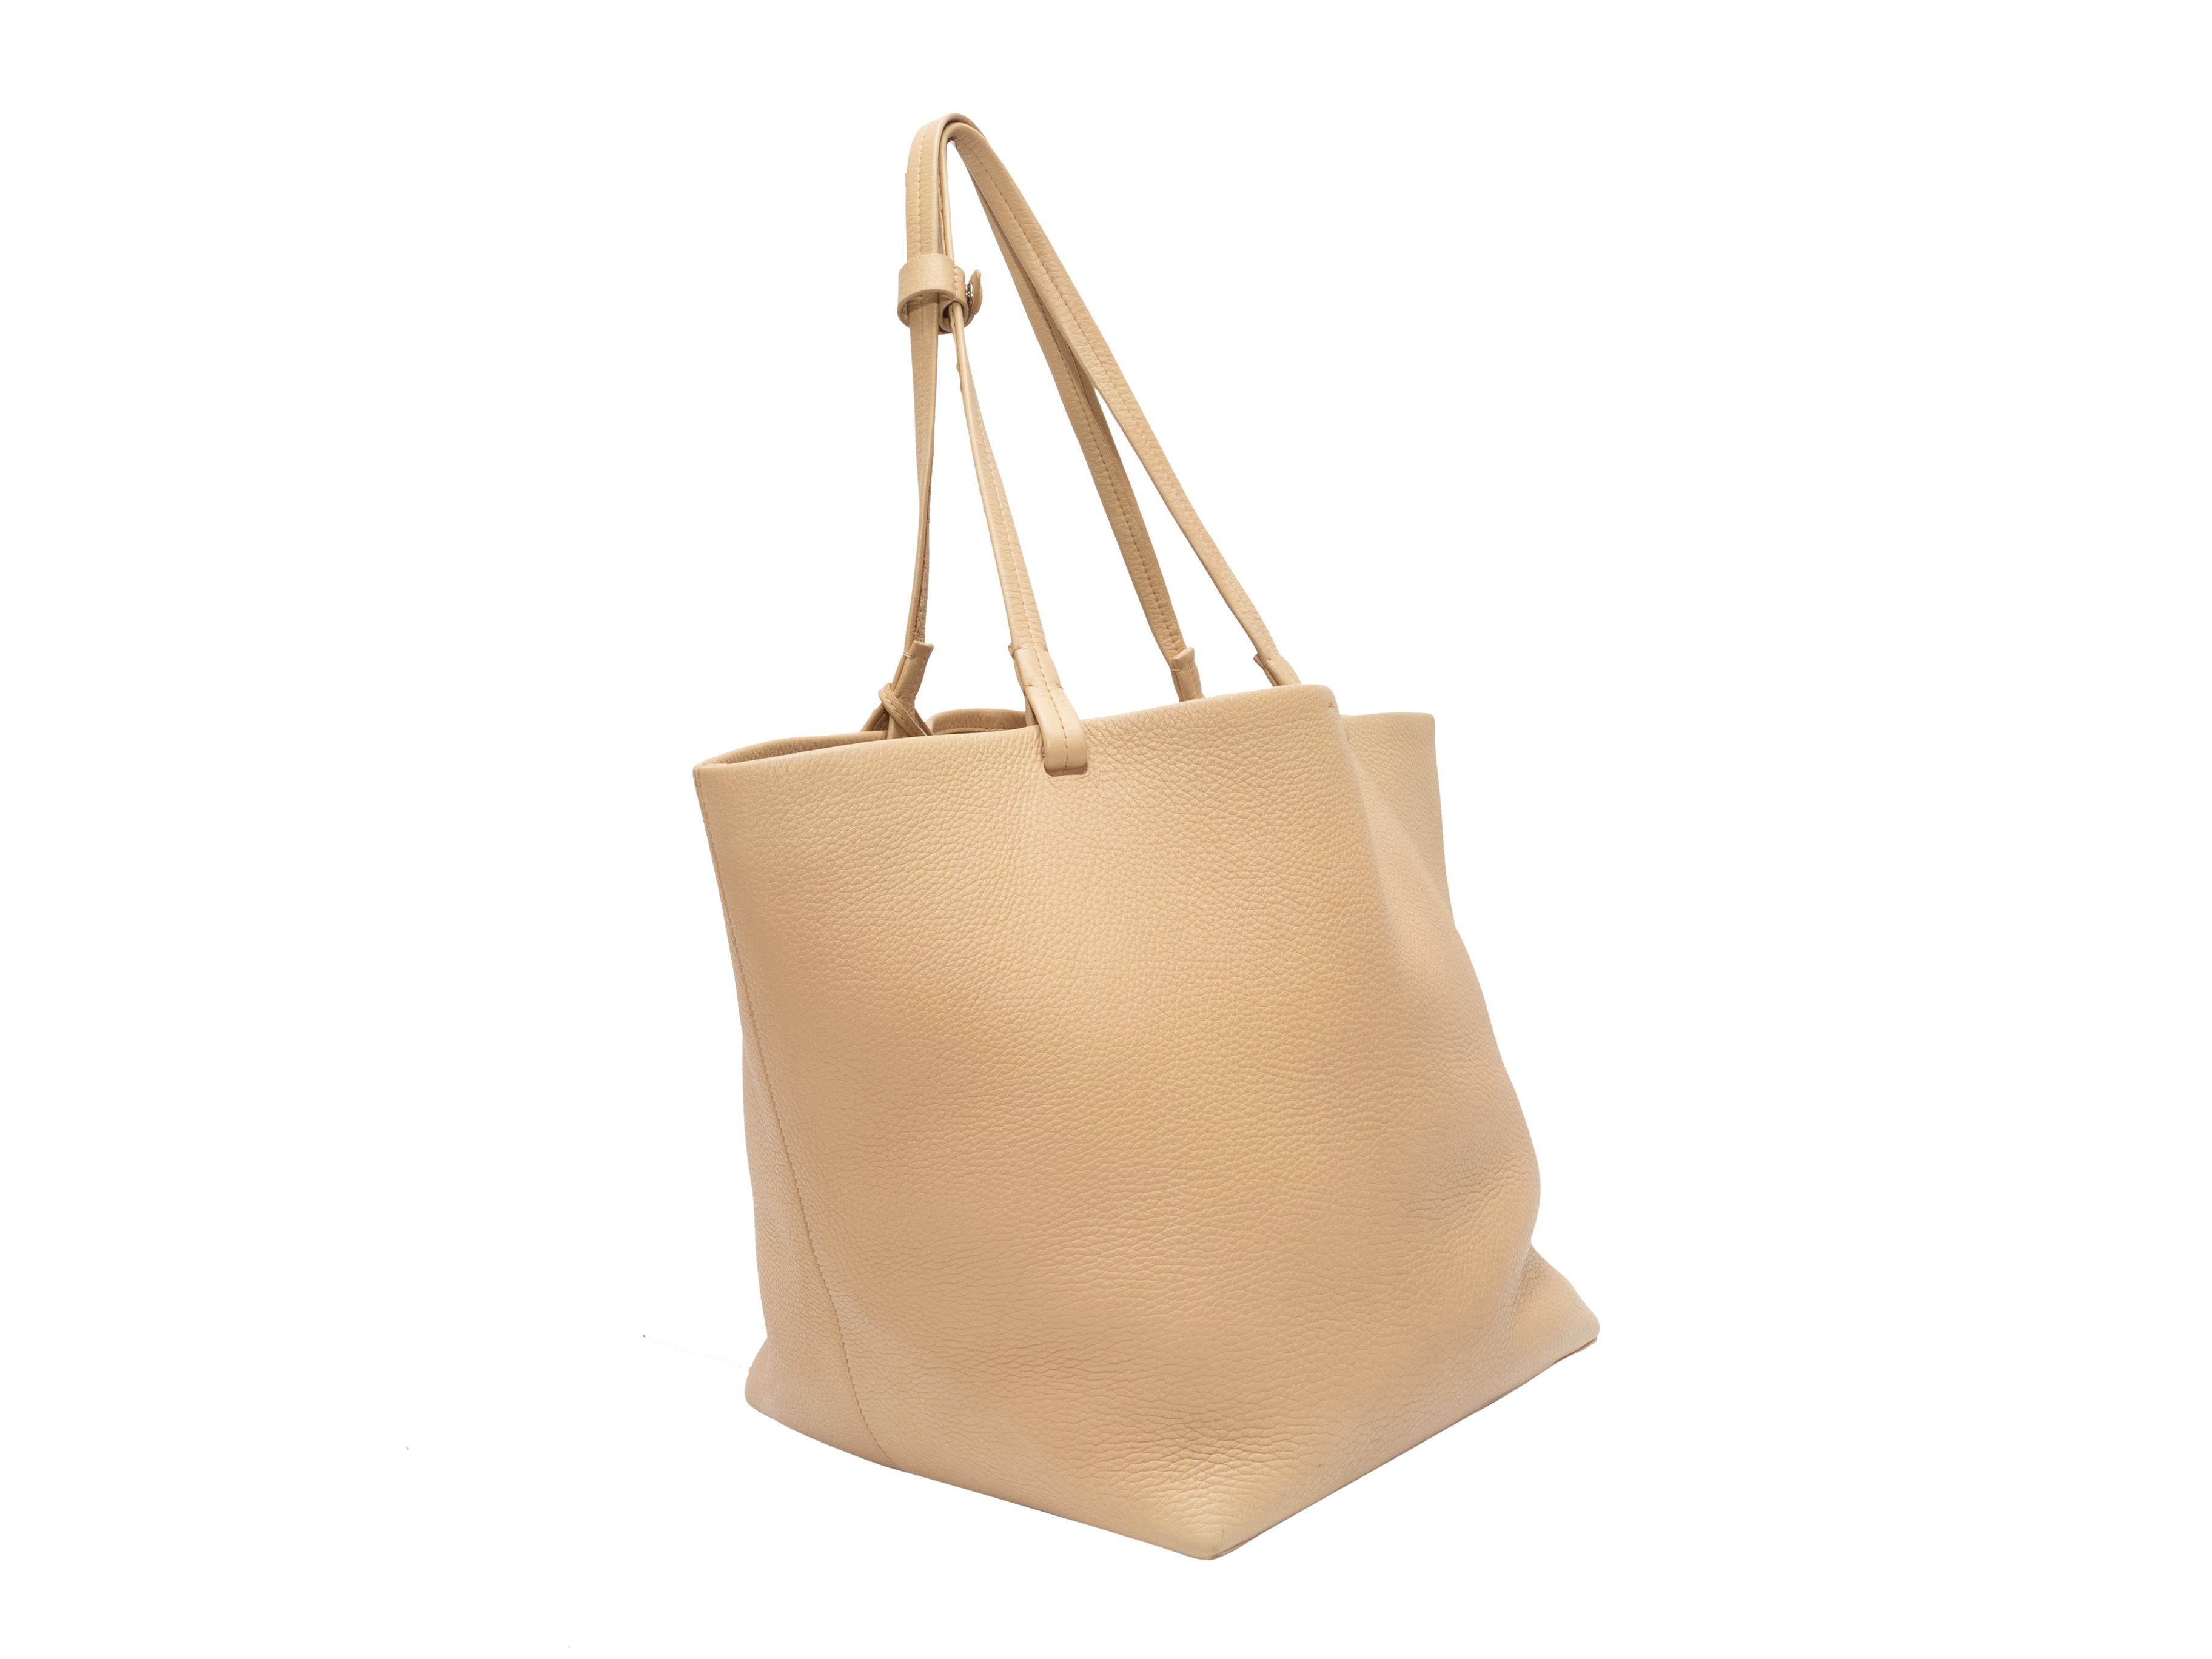 Product Details: Beige The Row Leather Tote Bag. This bag features a leather body, silver-tone hardware, dual flat top handles, and matching interior pouch. 18